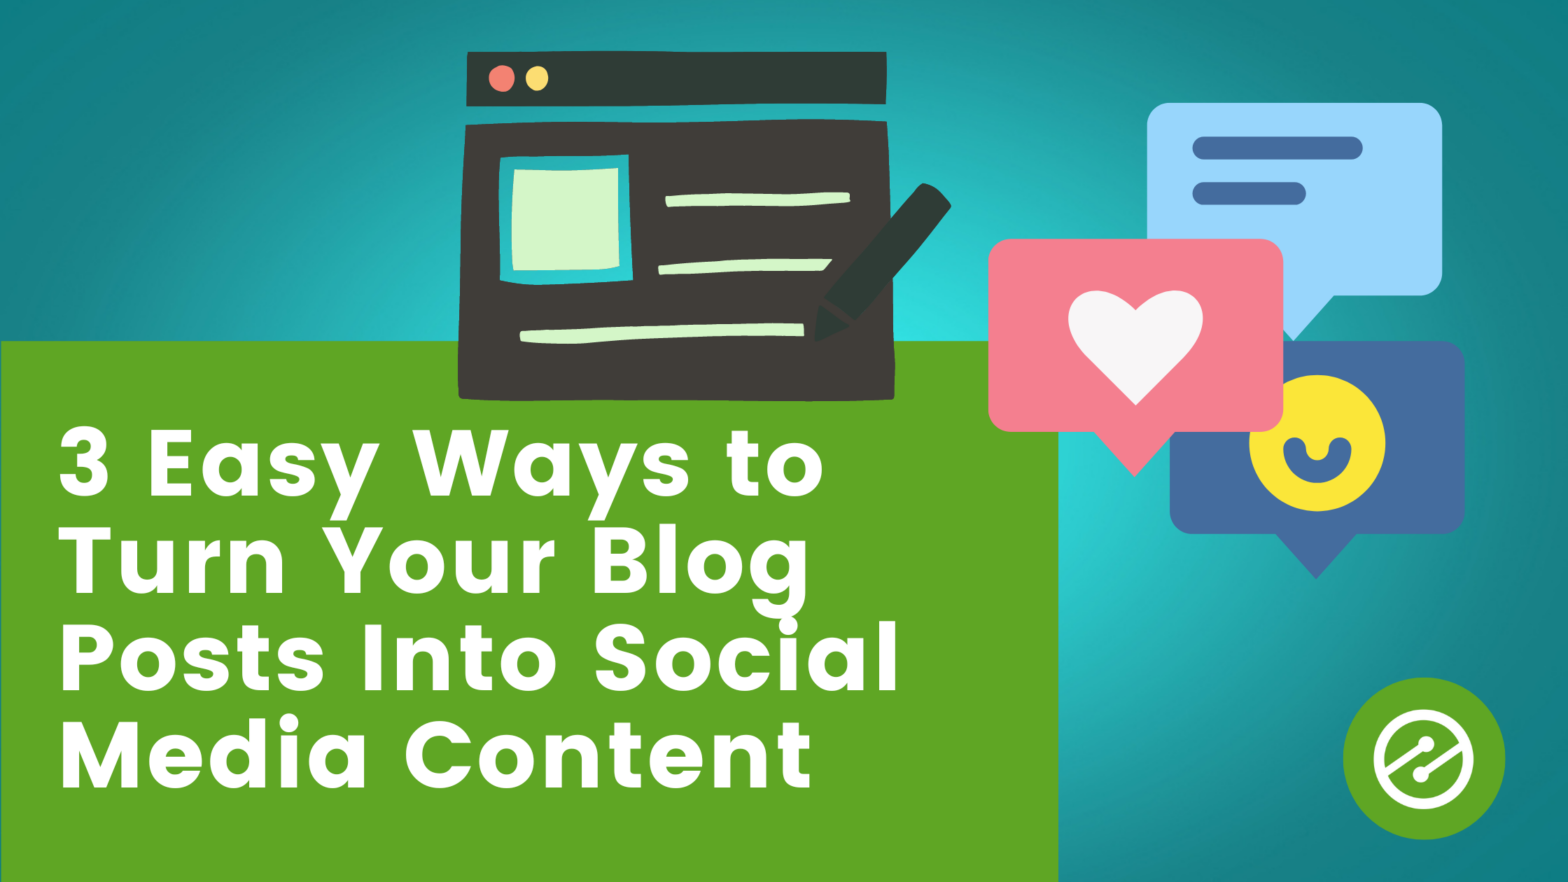 3 easy ways to turn blog posts into social media content - cover graphic